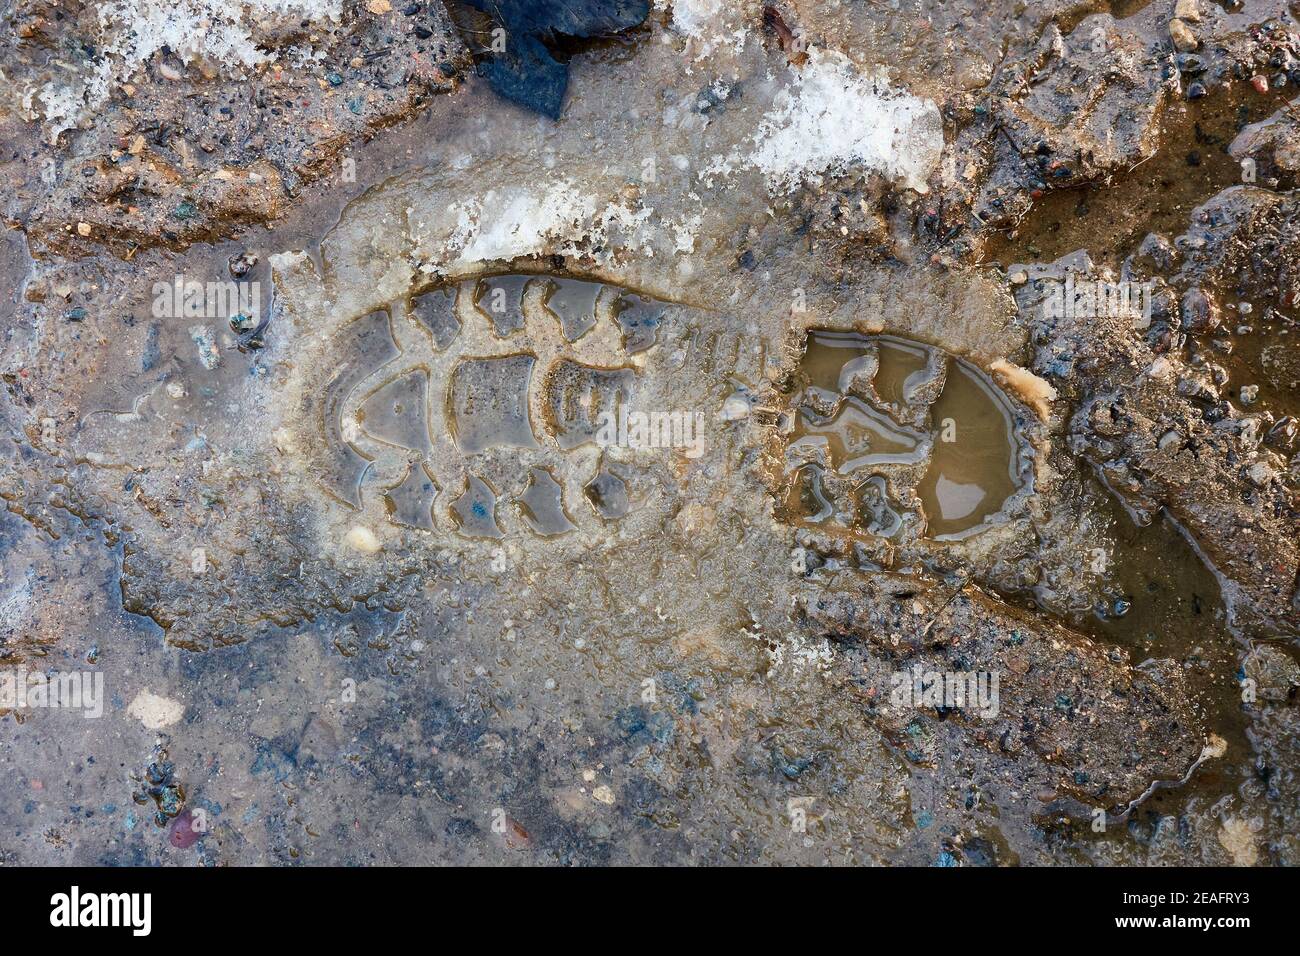 Single right footprint of a boot made in slushy snow and mud Stock Photo